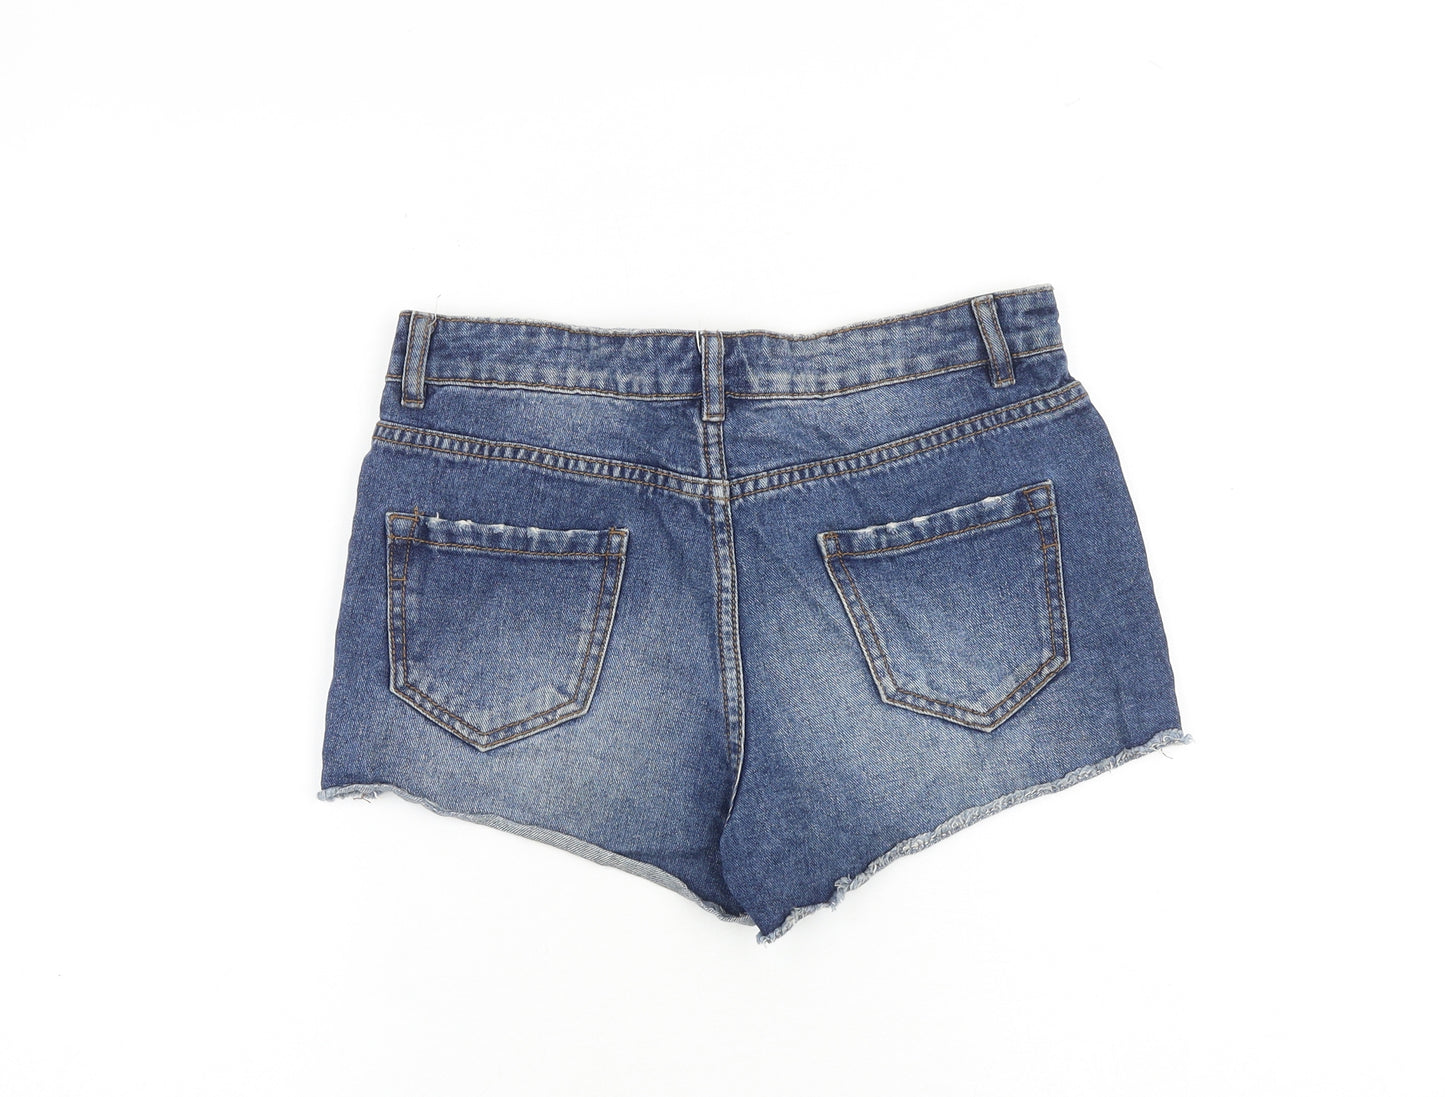 New Look Womens Blue 100% Cotton Cut-Off Shorts Size 8 L3 in Regular Zip - Distressed